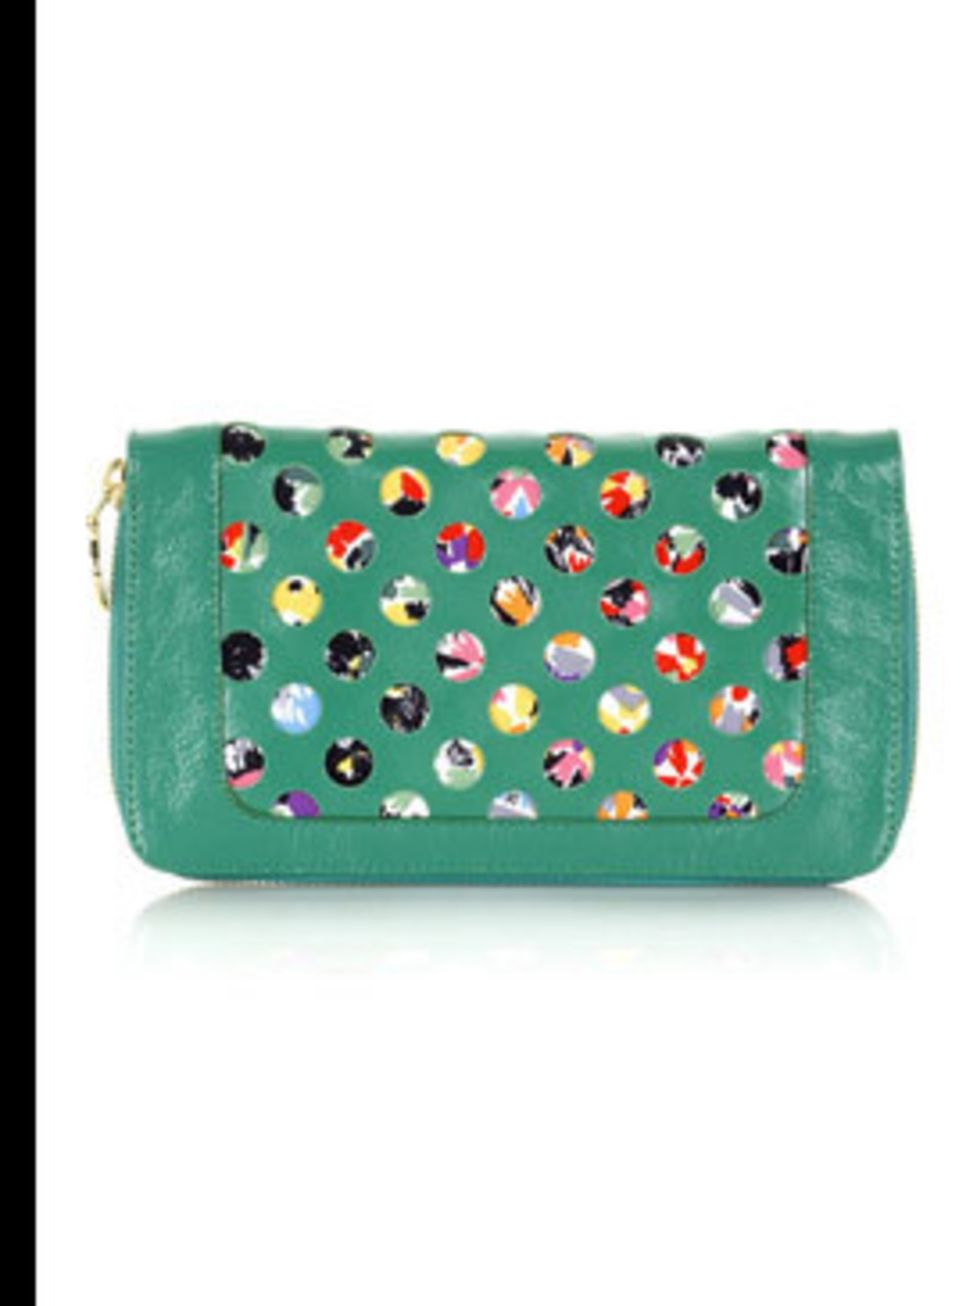 <p>Purse, £125 by See by Chloe at <a href="http://www.net-a-porter.com/product/39199">Net-A-Porter</a></p>